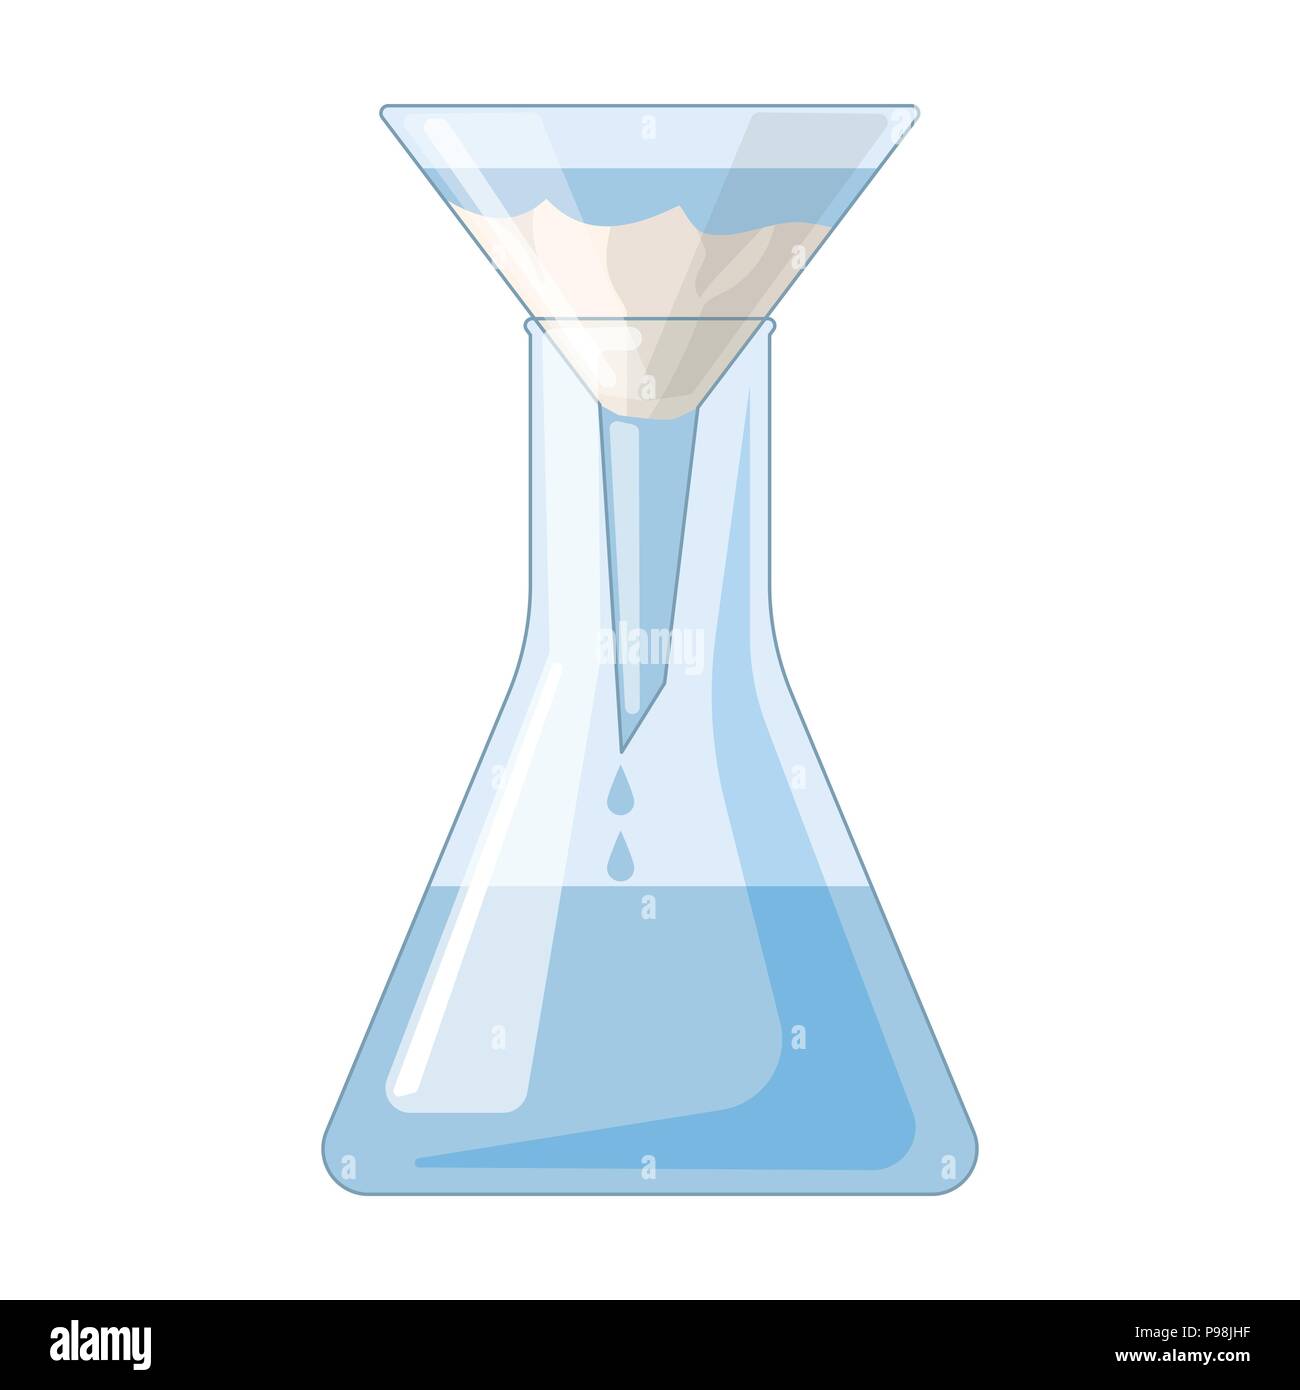 Filtration of water solution in a conical flask icon in cartoon design isolated on white background. Water filtration system symbol stock vector illus Stock Vector